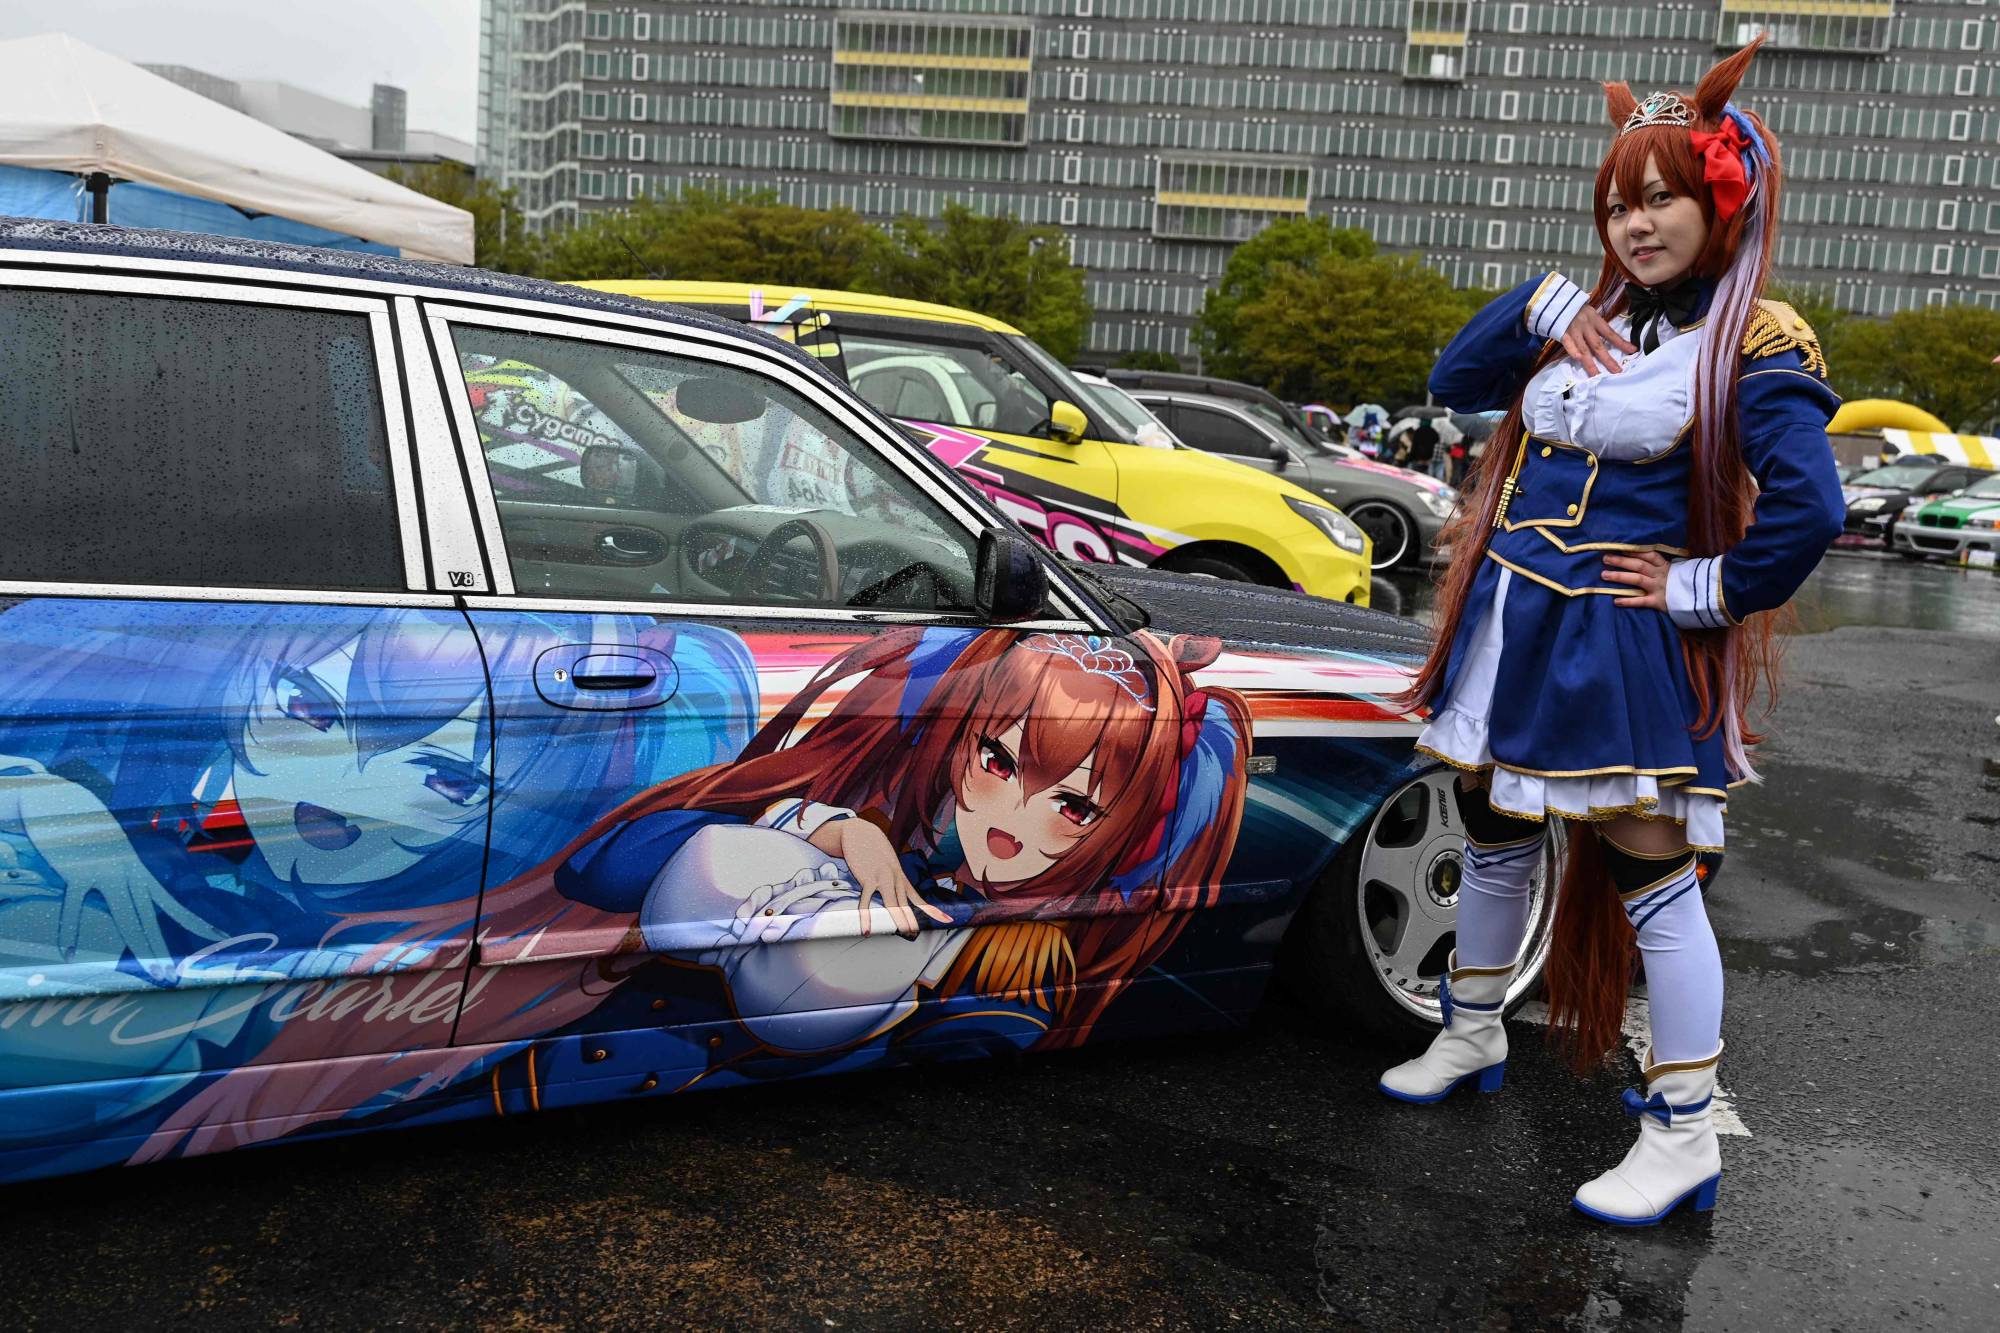 Design a racing anime wrap livery car or any vehicle by Bingoright | Fiverr